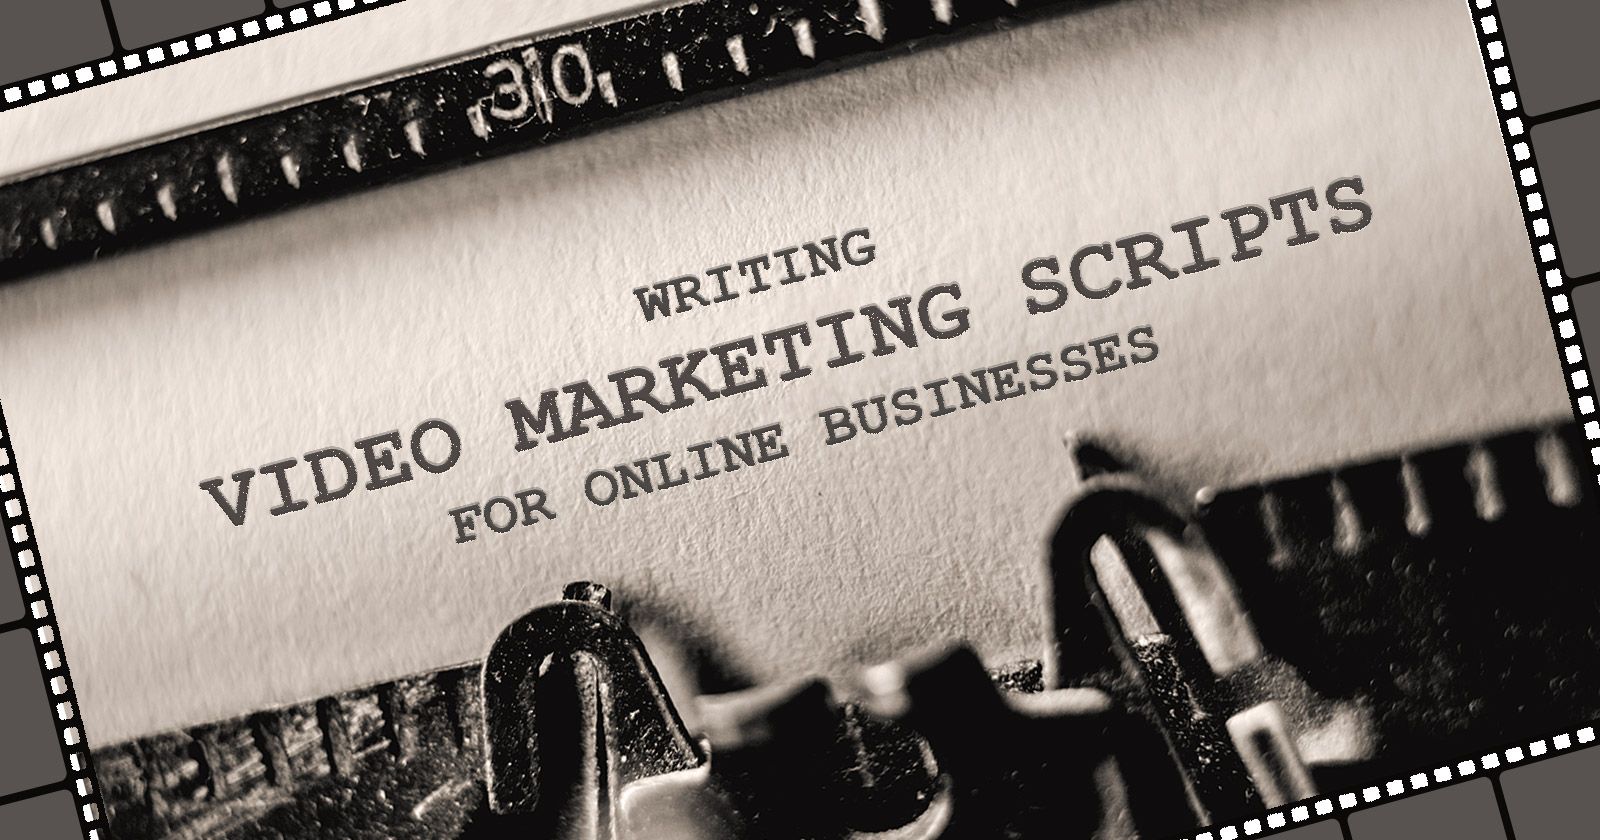 9 Tips for Writing Video Marketing Scripts for an Online Business